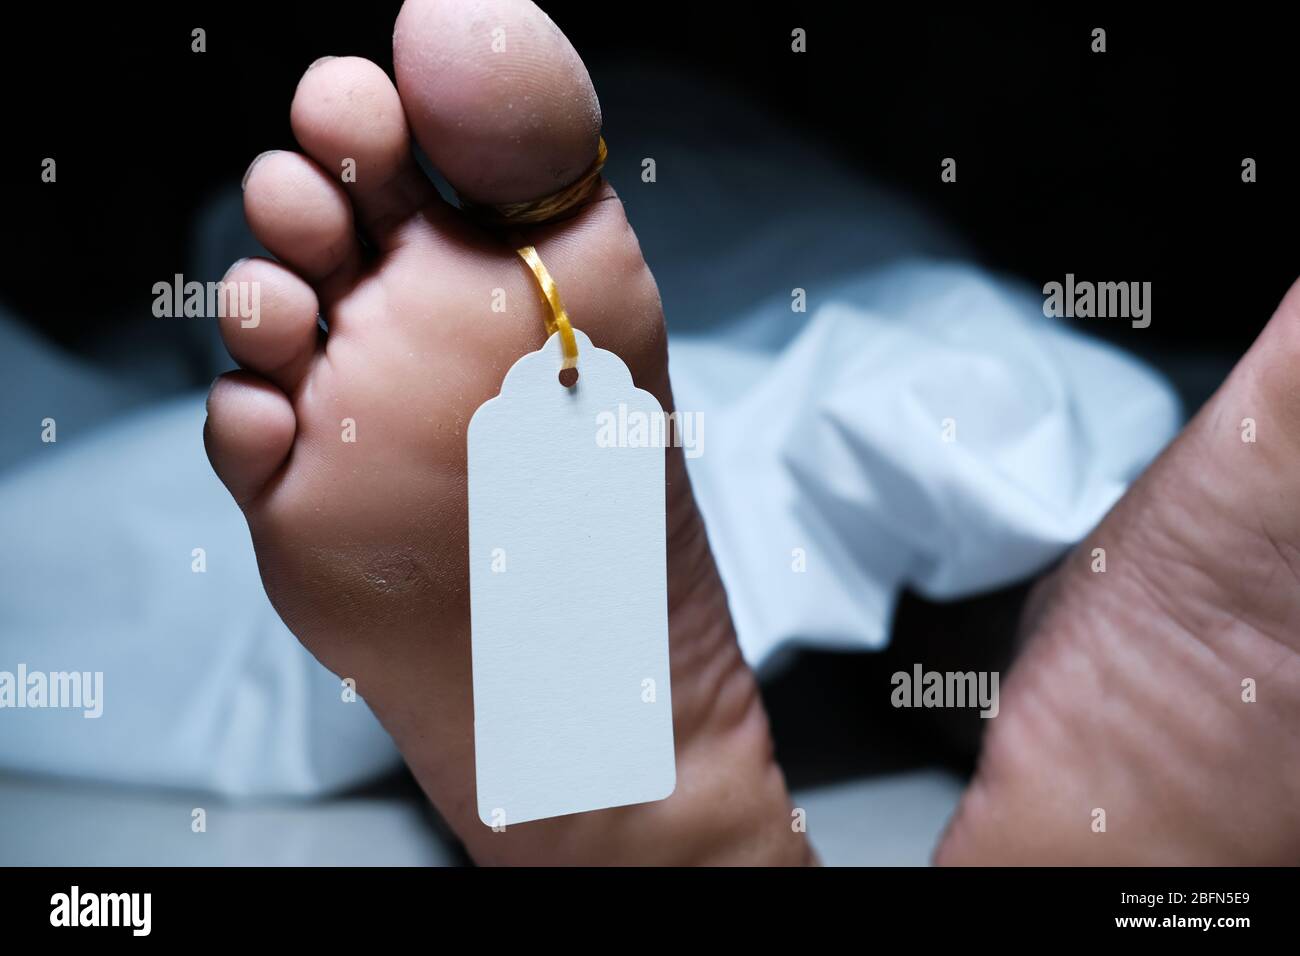 Two feet of a dead body with a tag attached to the toe Stock Photo